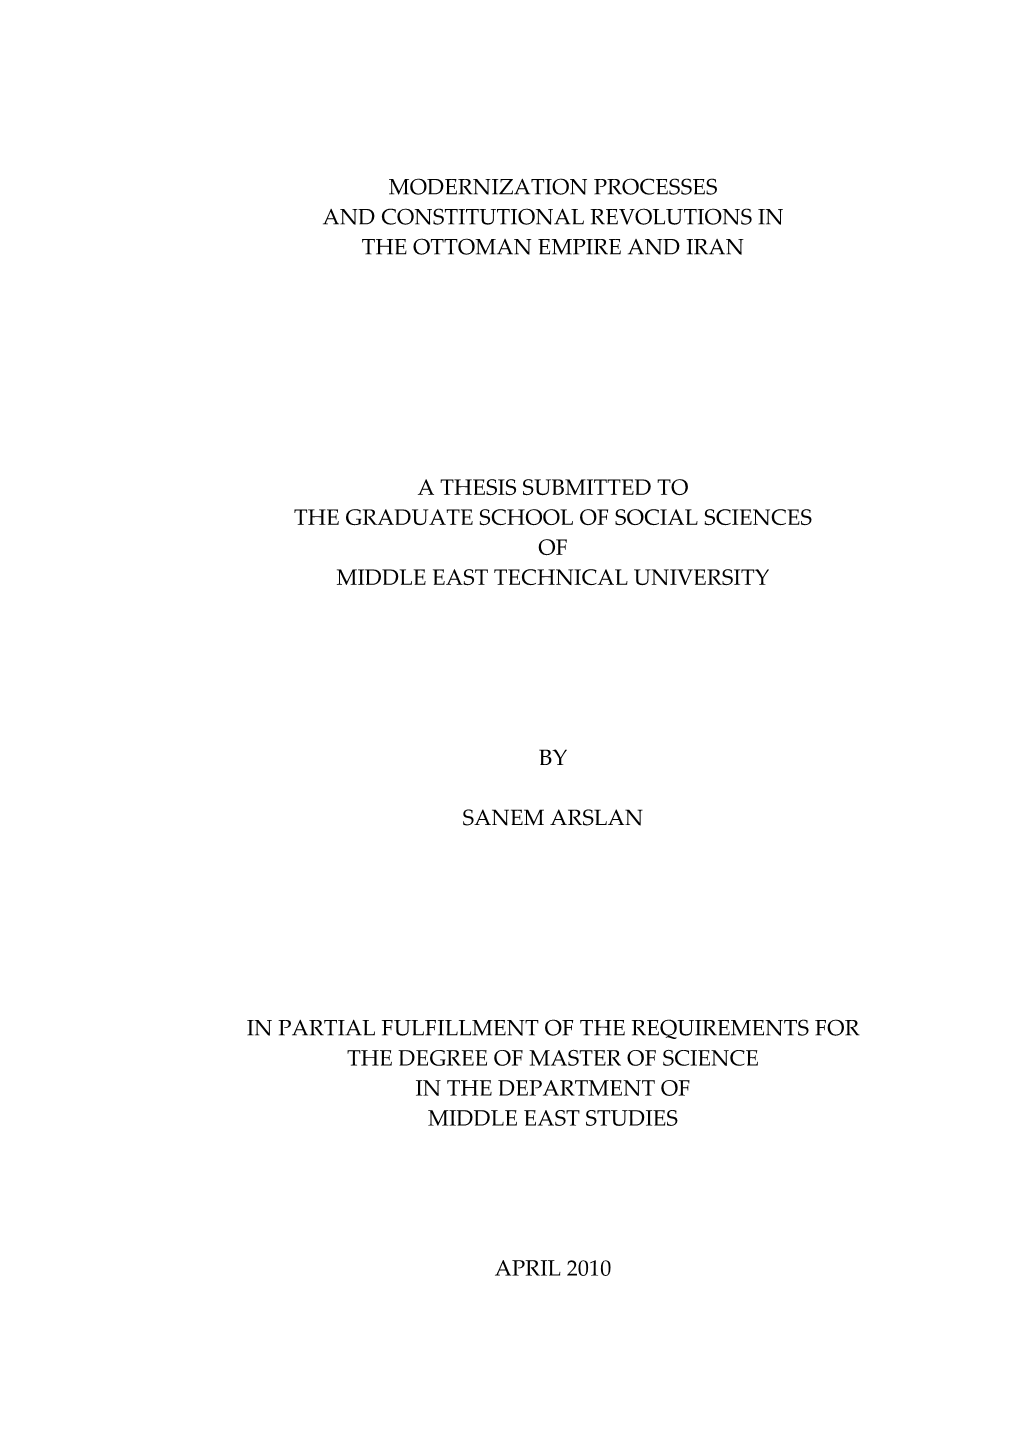 Modernization Processes and Constitutional Revolutions in the Ottoman Empire and Iran a Thesis Submitted to the Graduate Schoo